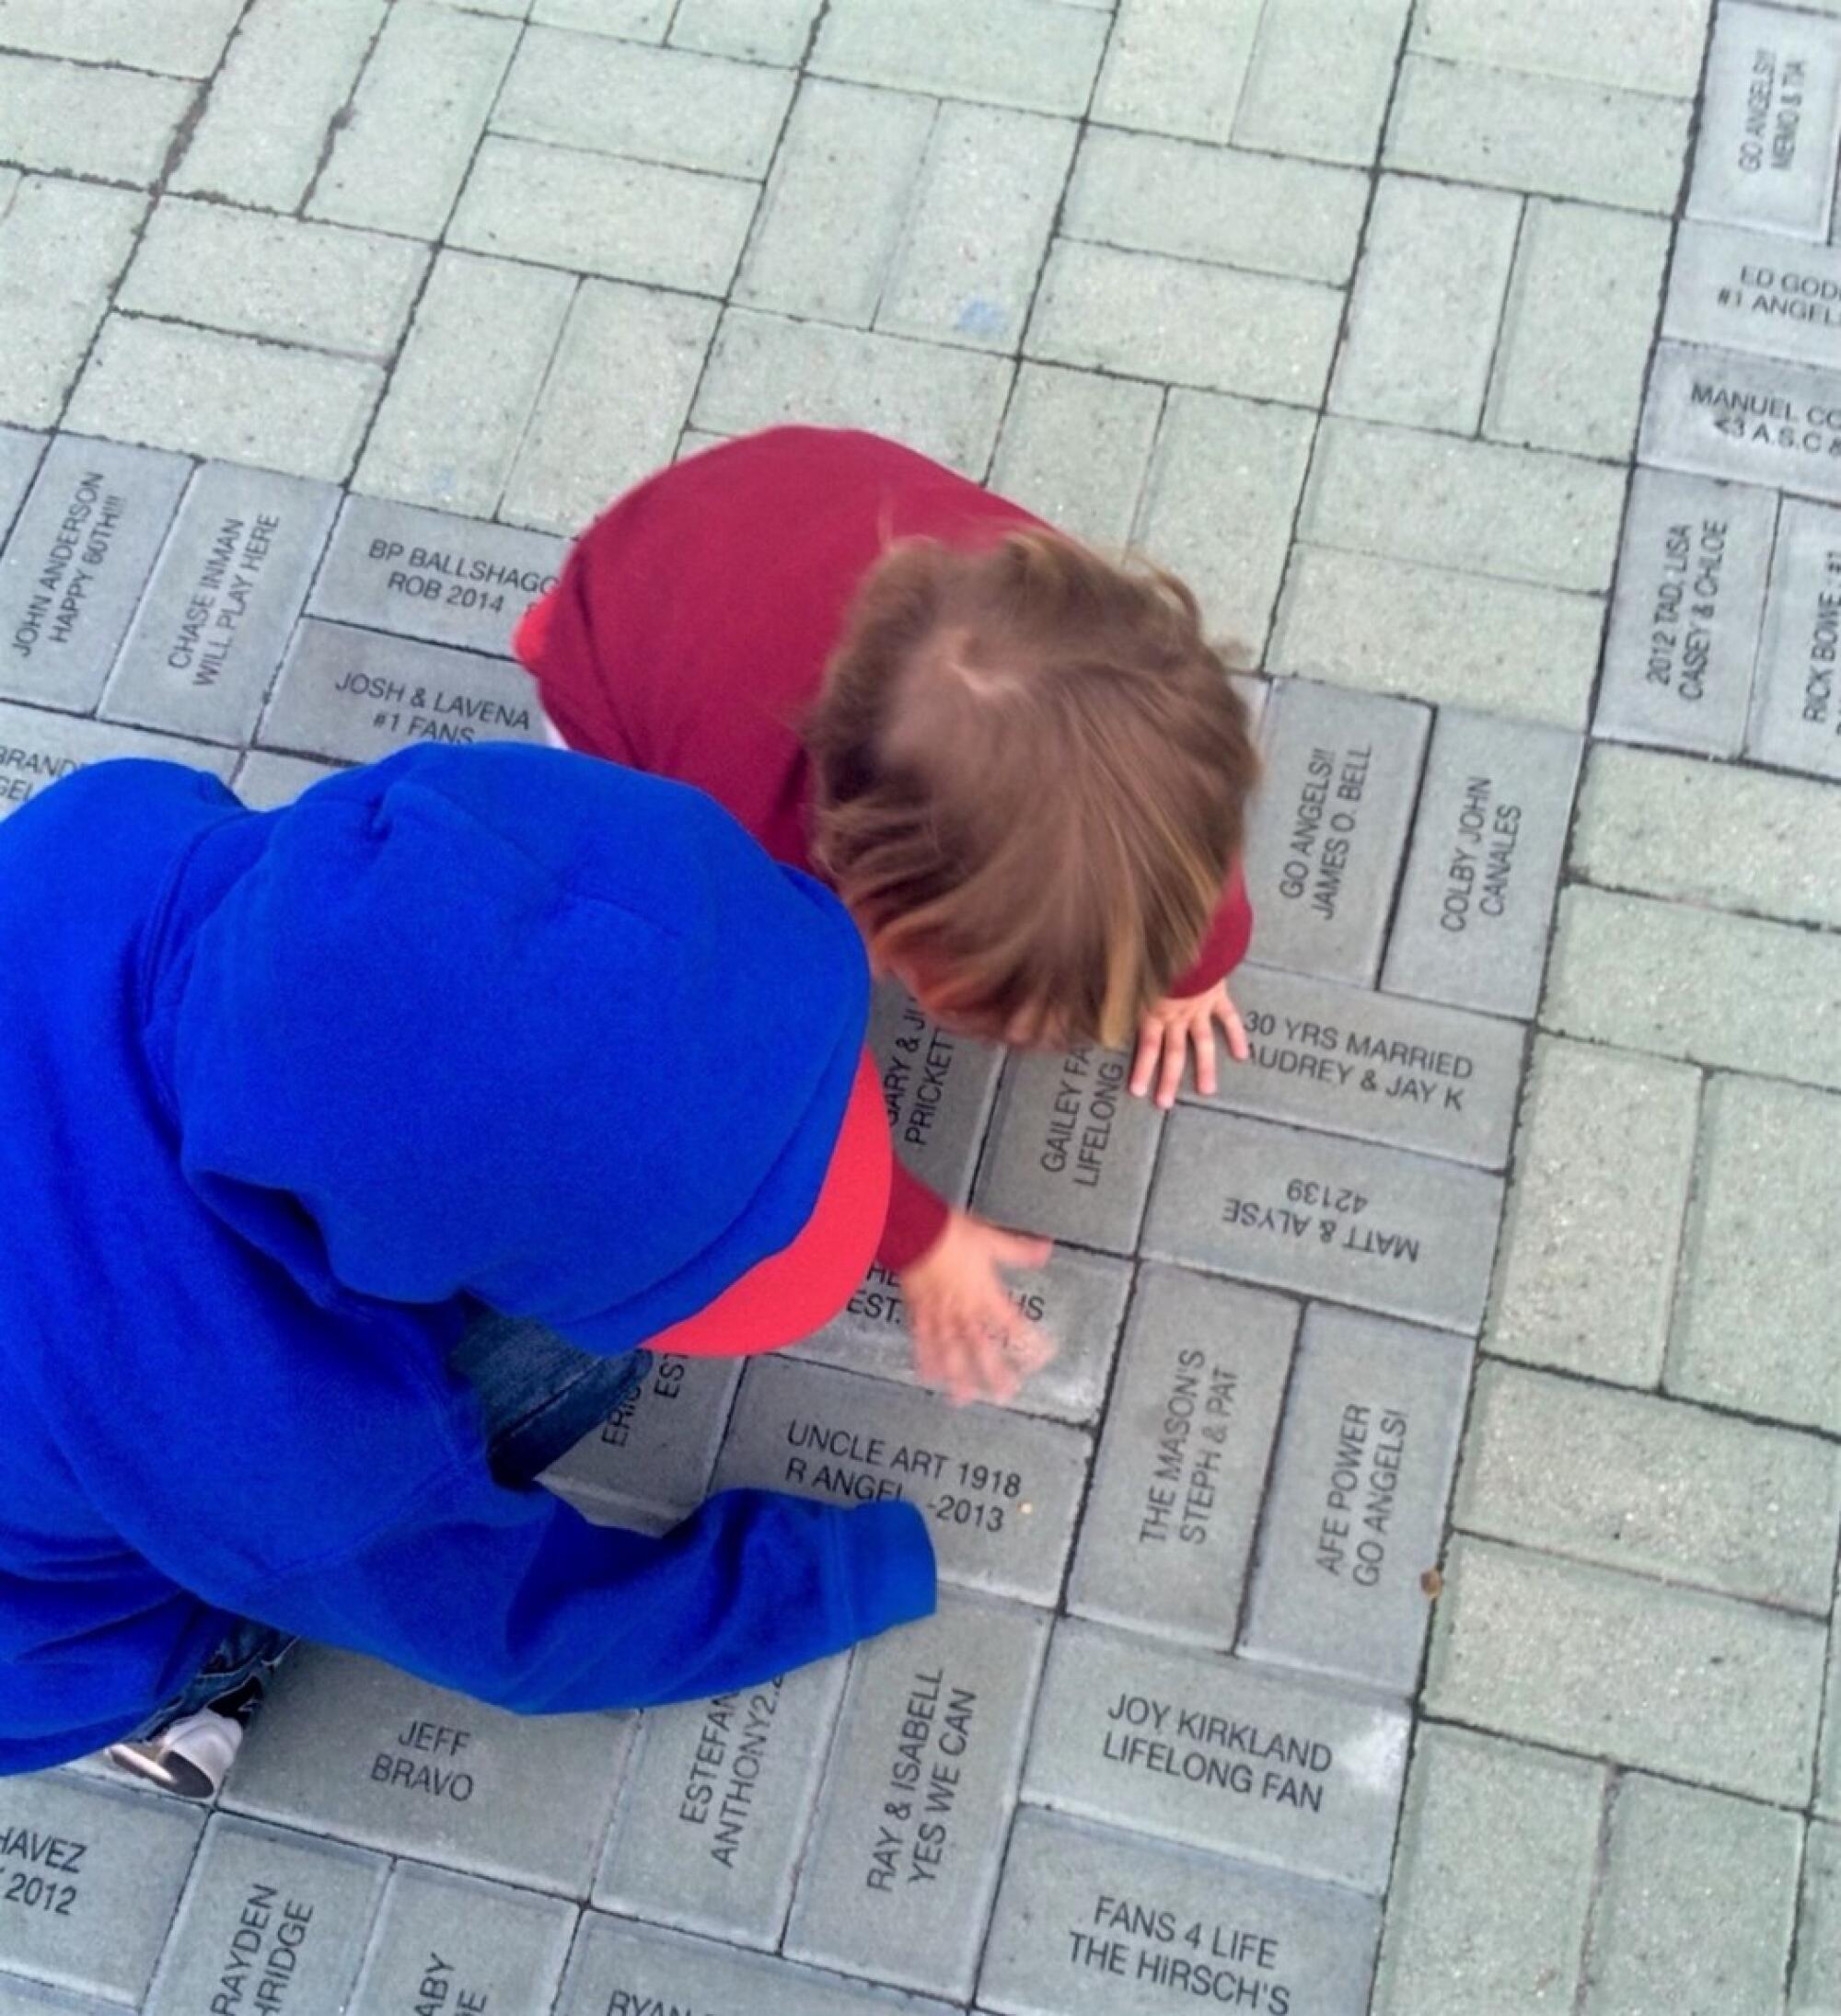 Tawyna Johnson Hesse’s children crouch to touch the brick dedicated to her late Uncle Art.